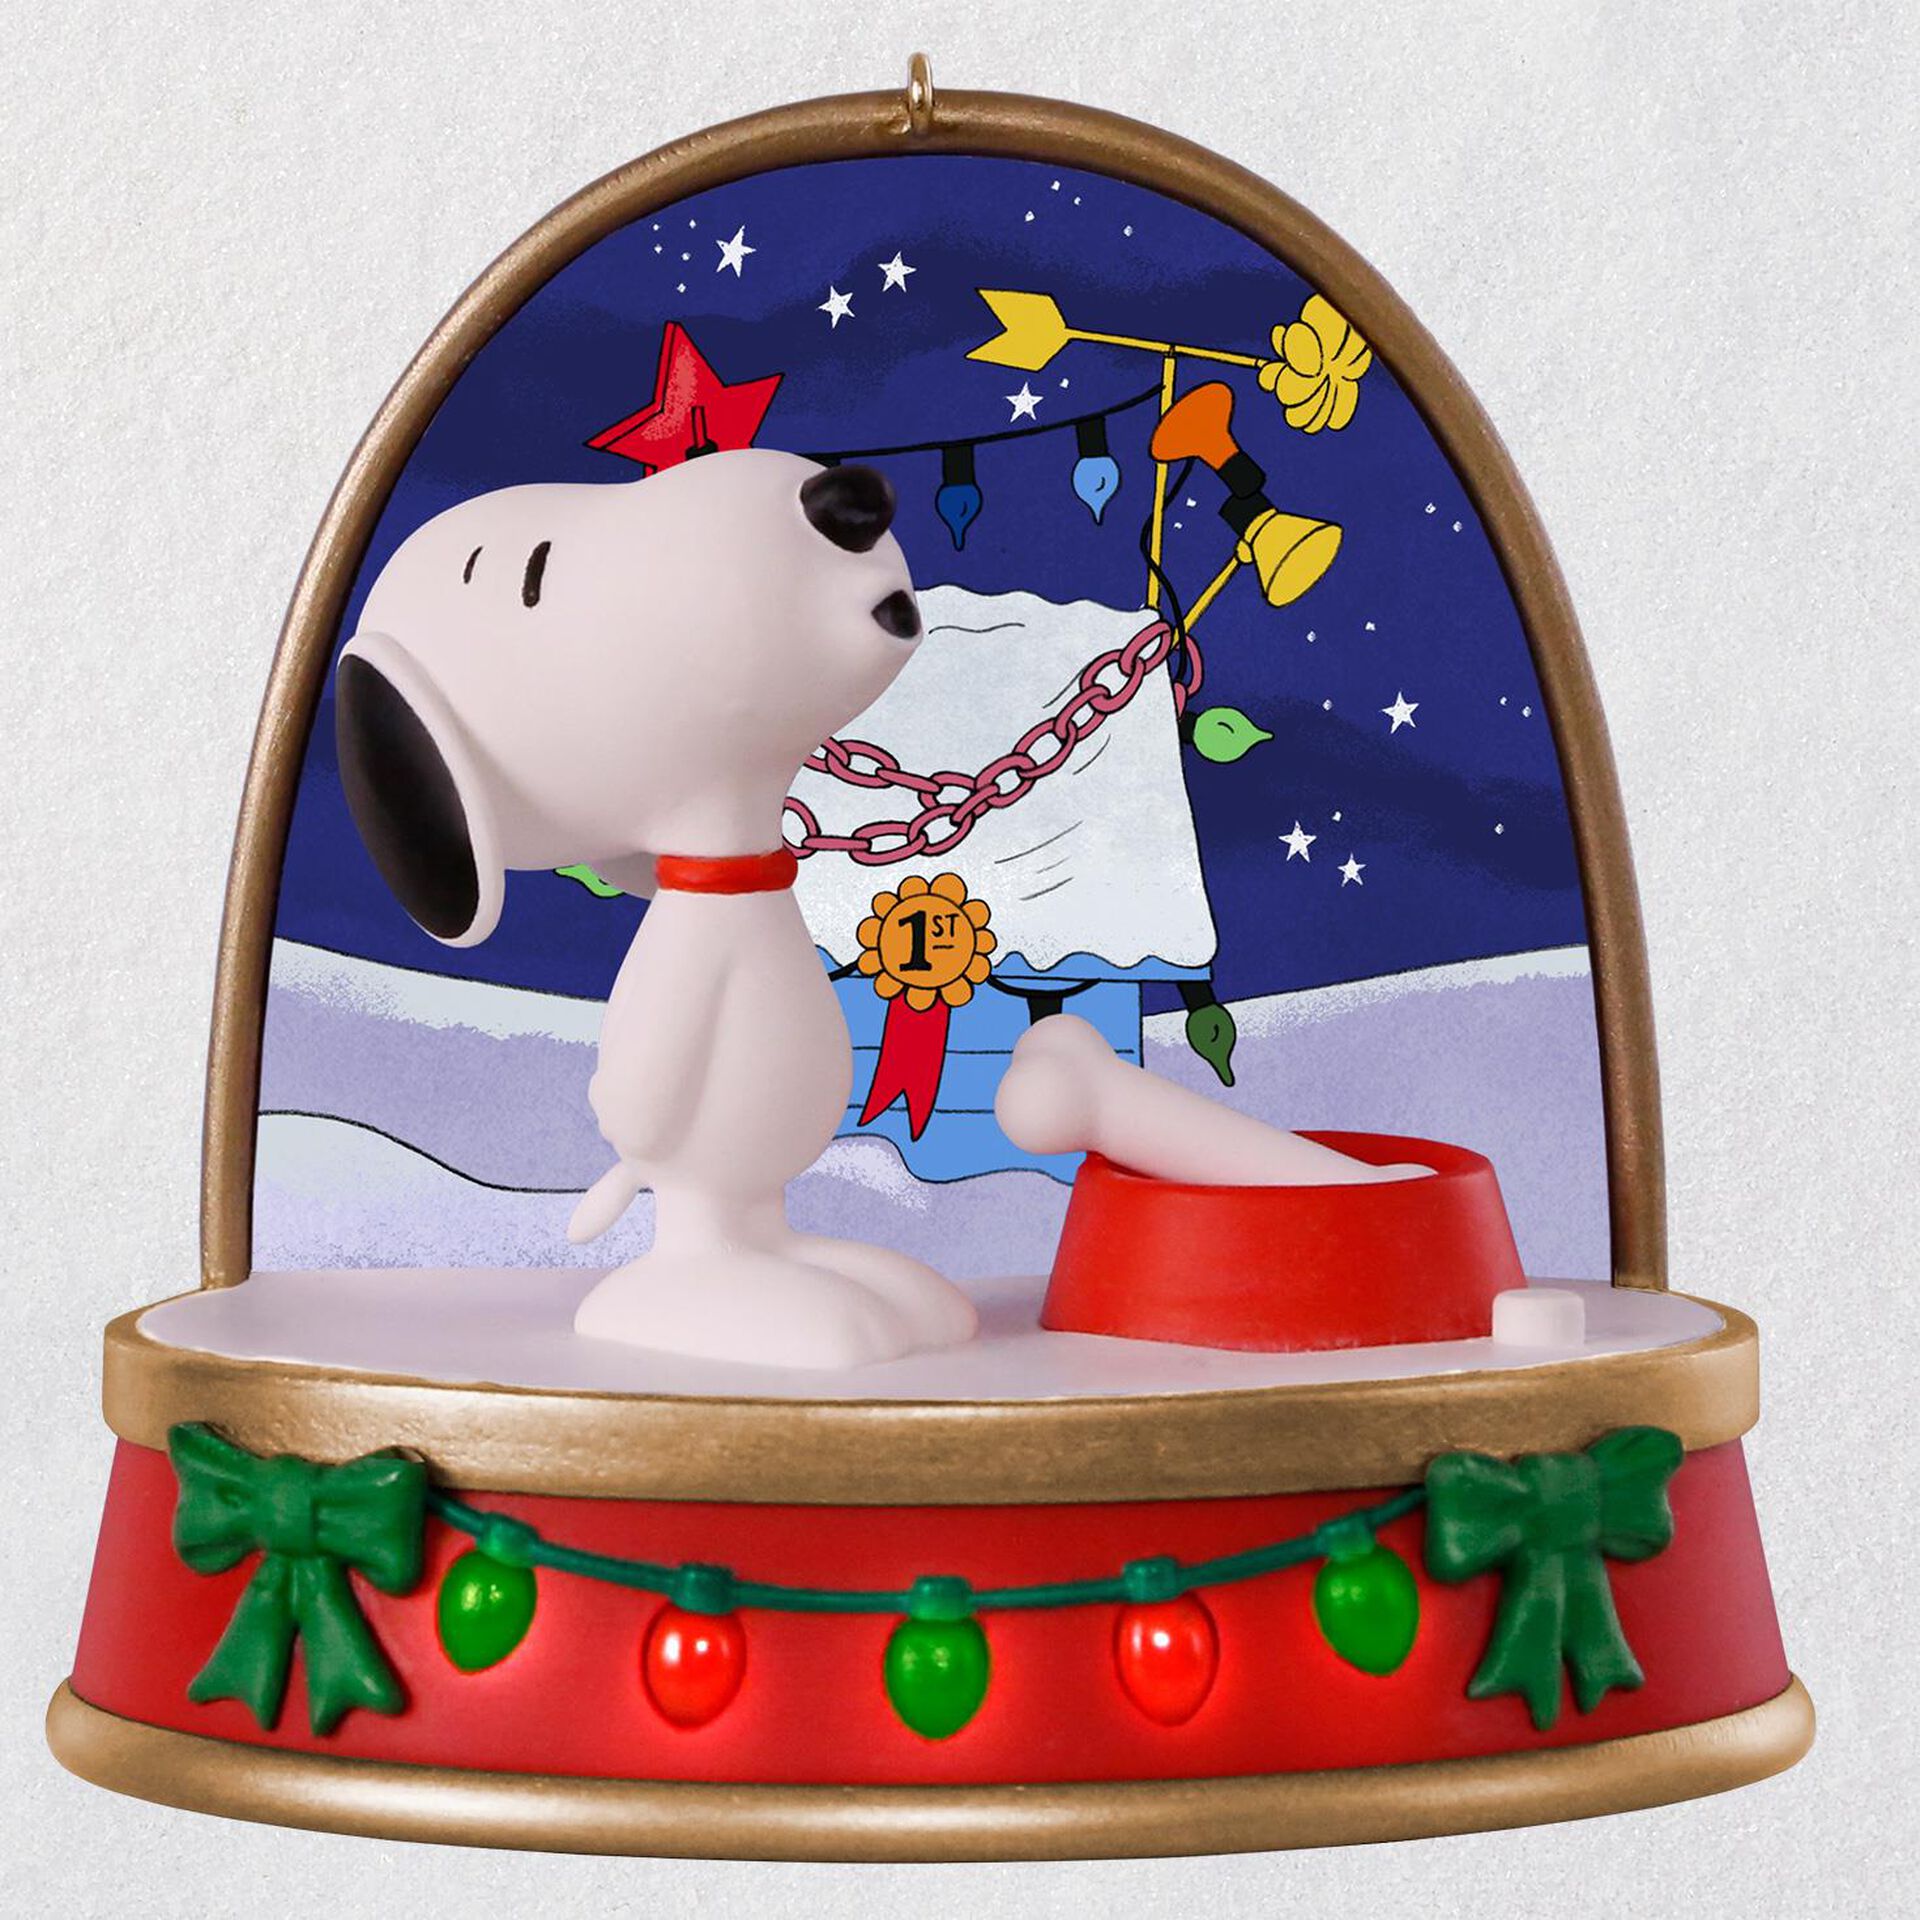 Peanuts® A Charlie Brown Christmas Snoopy Ornament With Sound and Light